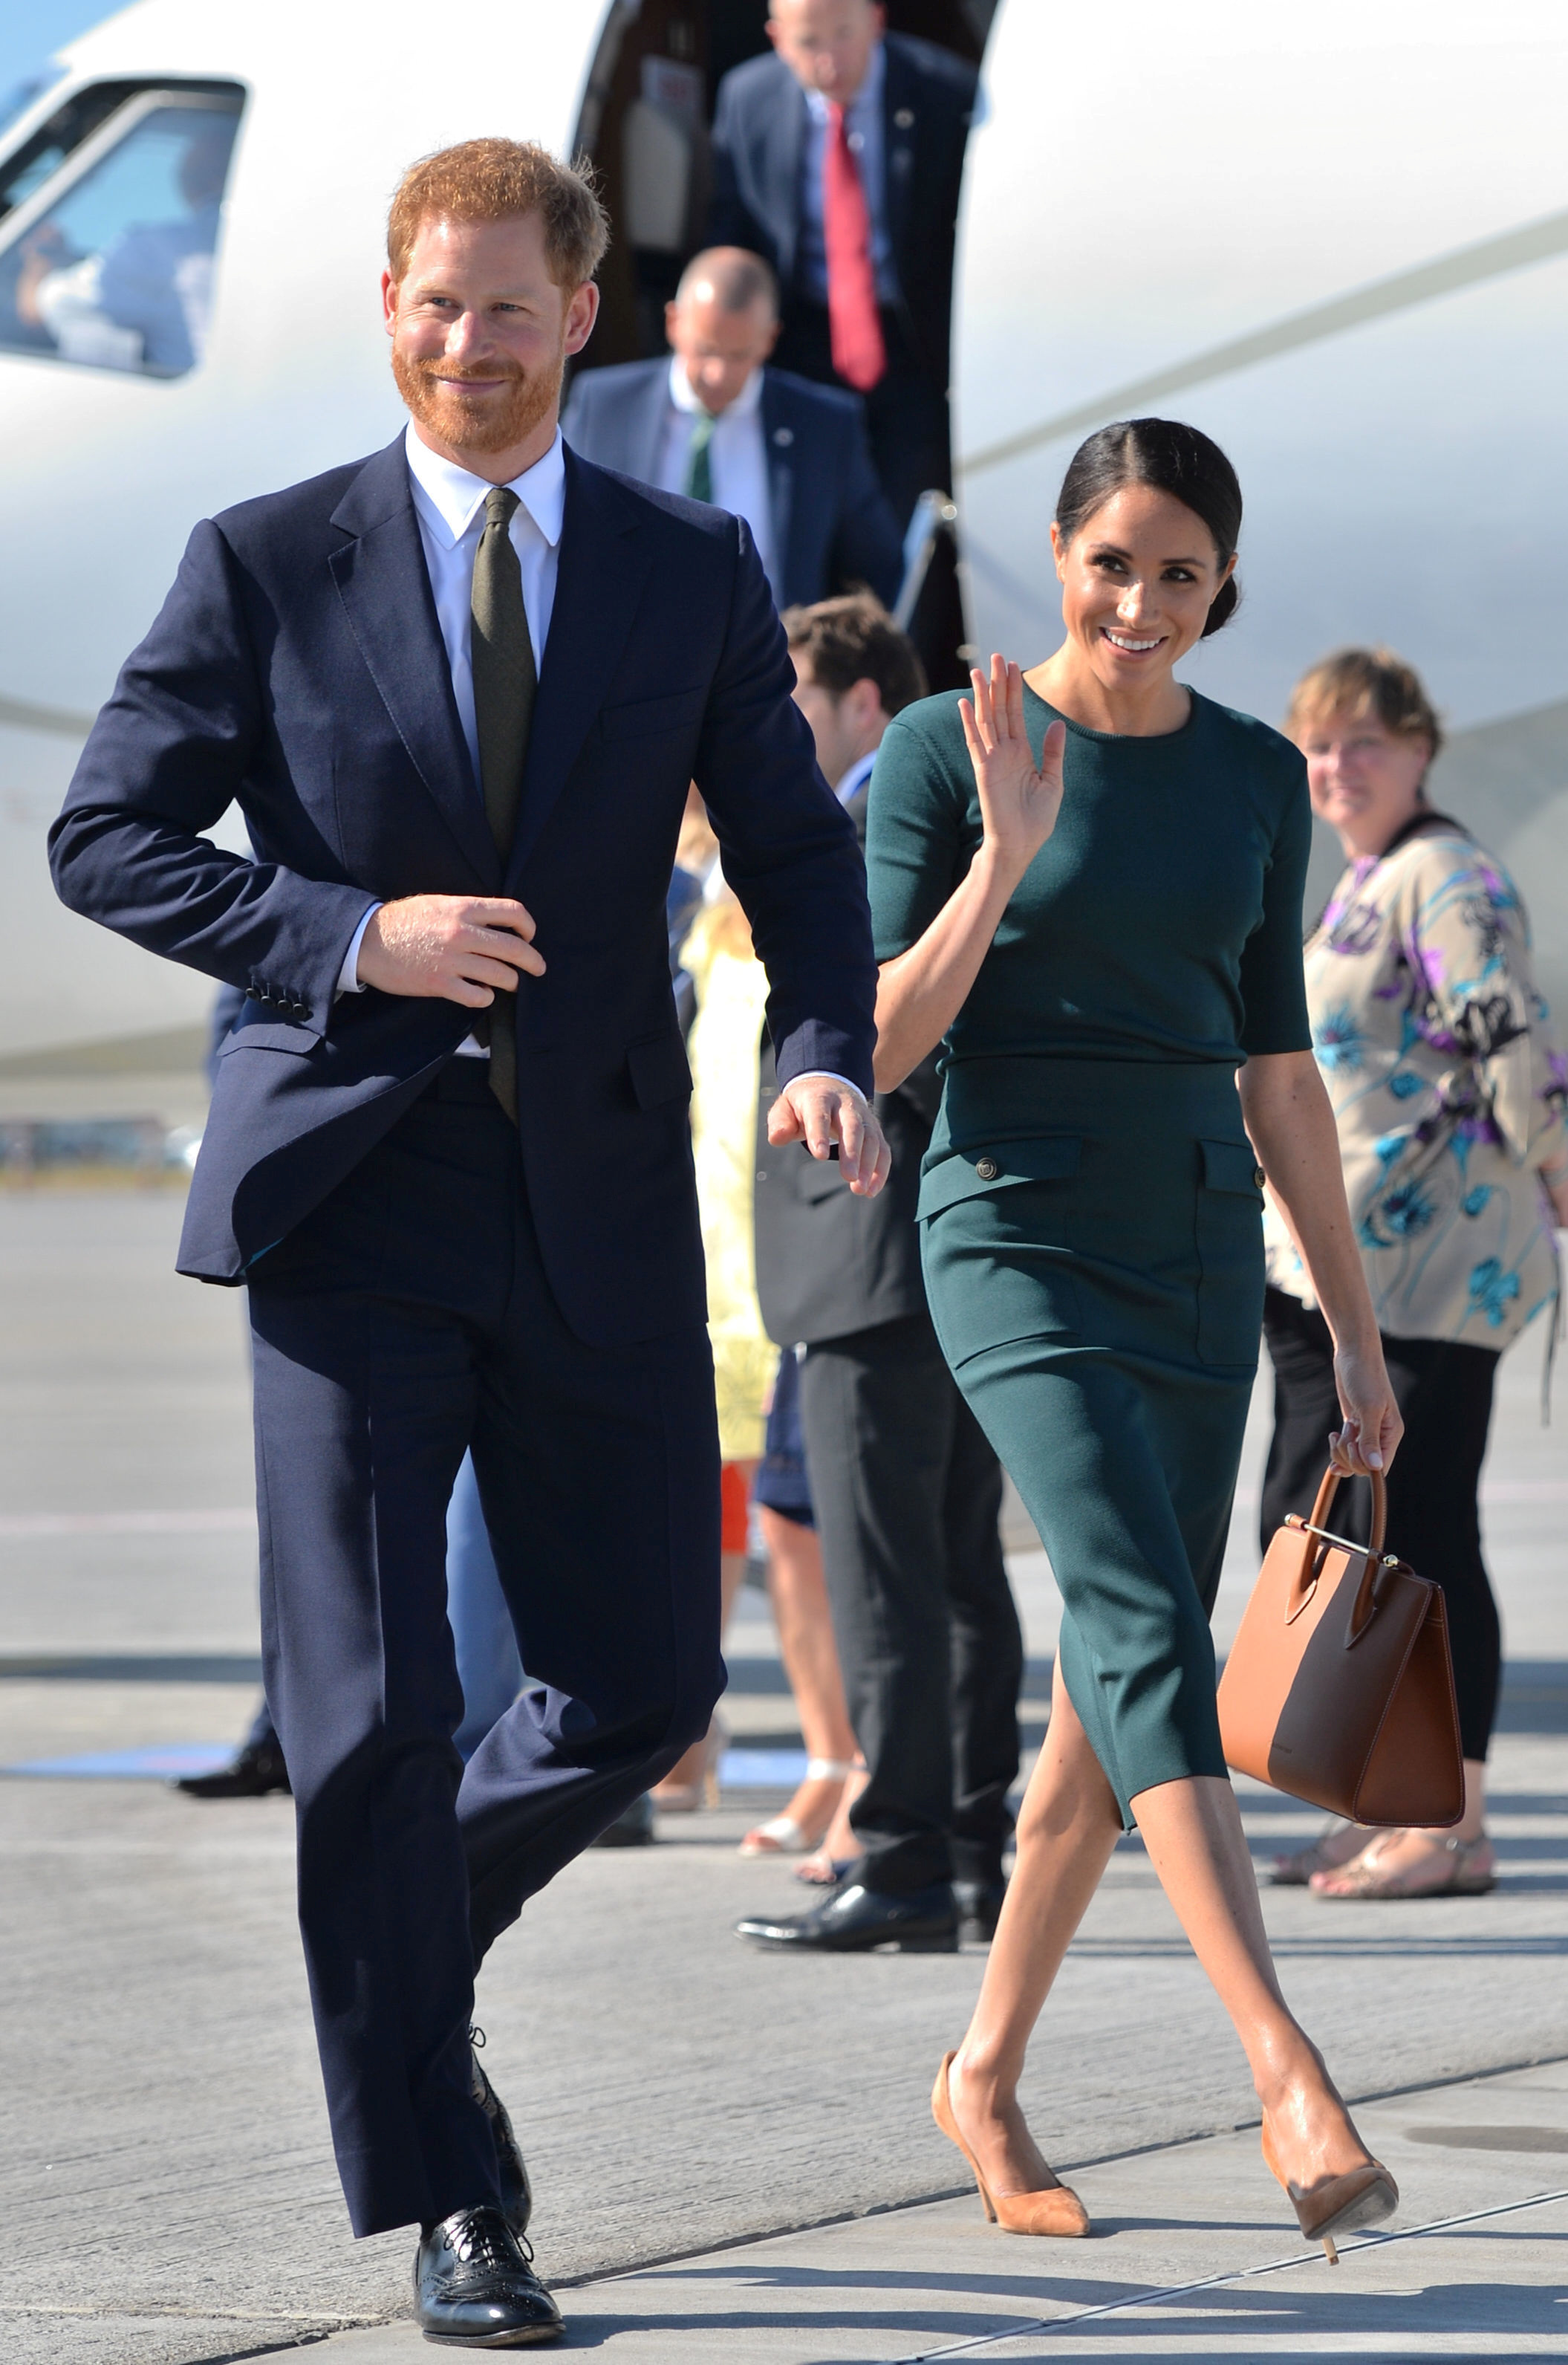 Britain's Prince Harry and his wife Meghan, the Duke and Duchess of Sussex, arrive at Dublin City Airport for a two-day visit to Dublin, Ireland July 10, 2018.  Dominic Lipinski/Pool via REUTERS - RC1B95B77AE0